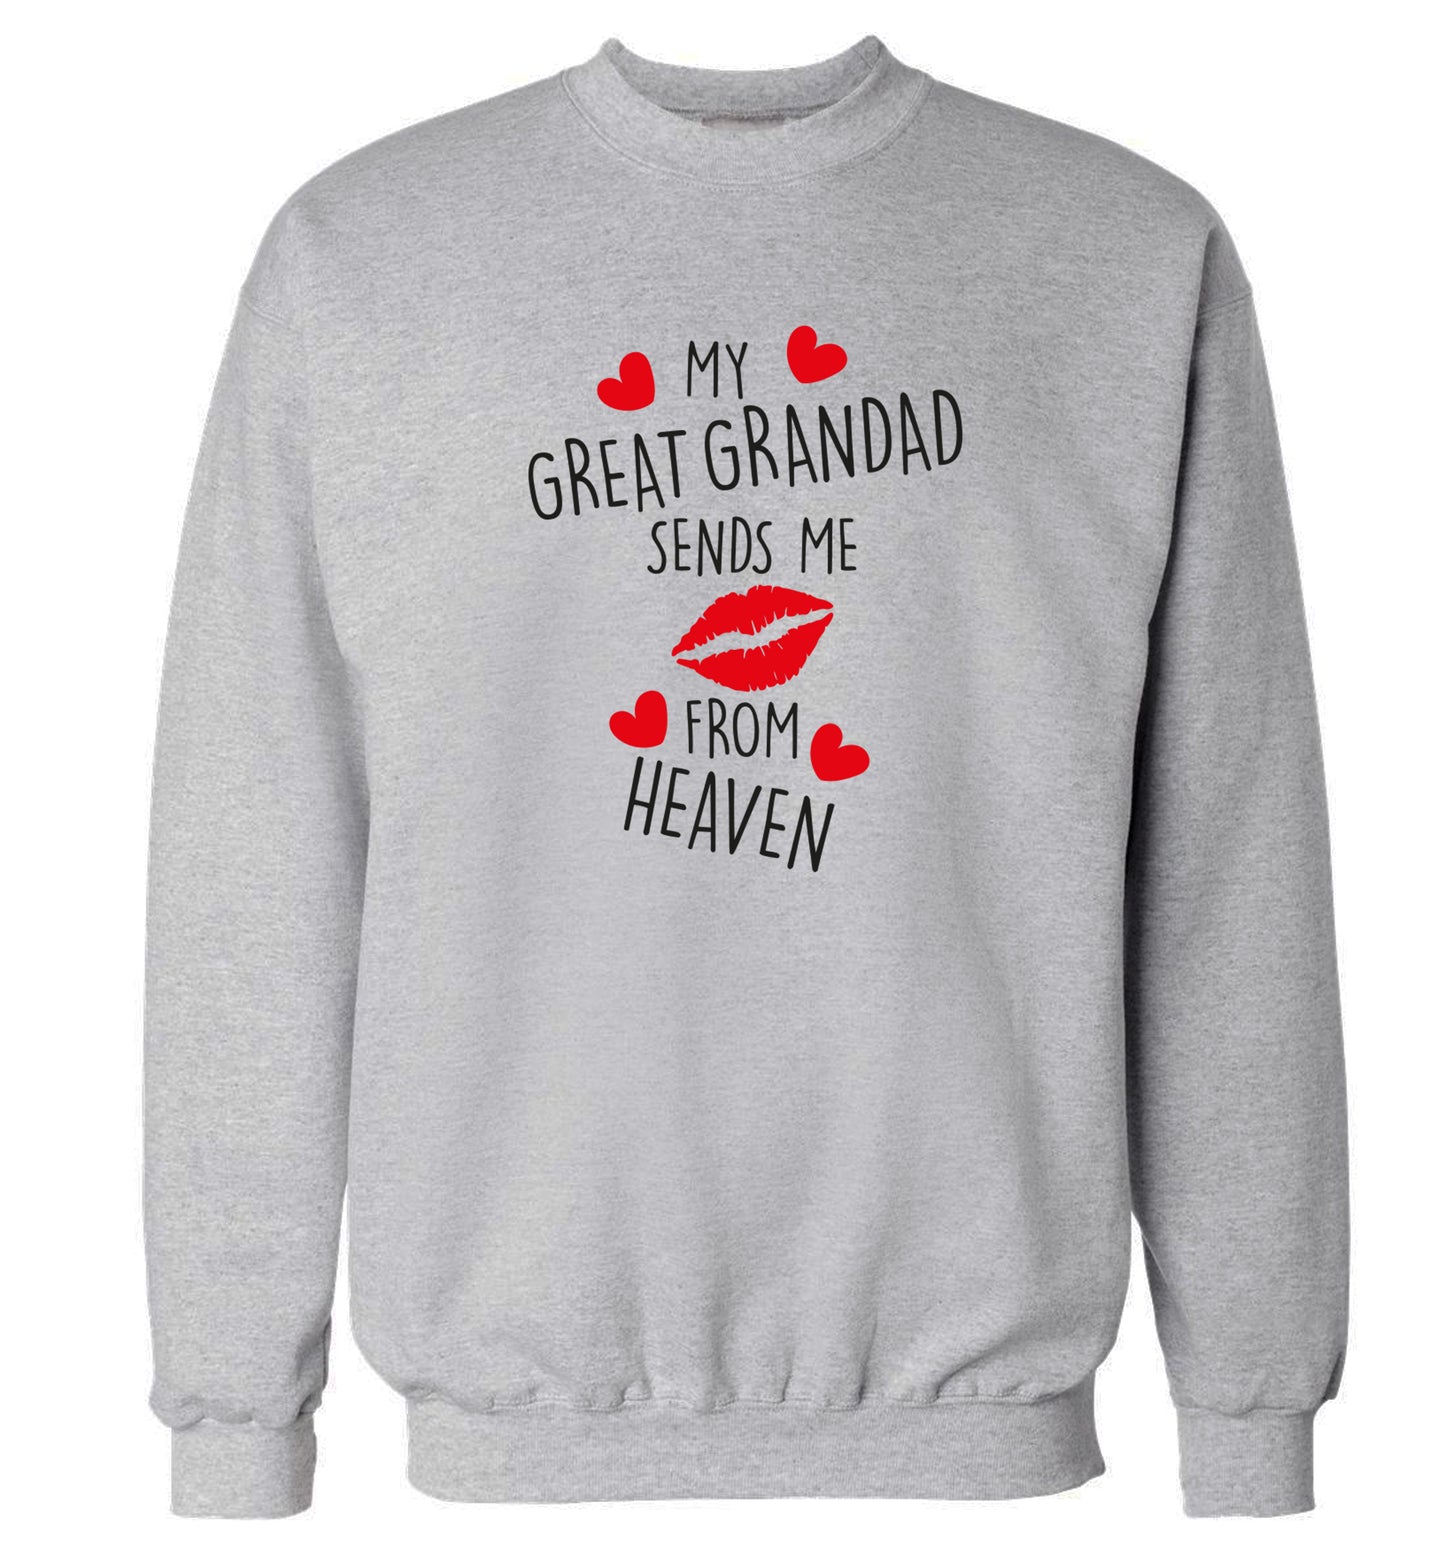 My great grandad sends me kisses from heaven Adult's unisex grey Sweater 2XL